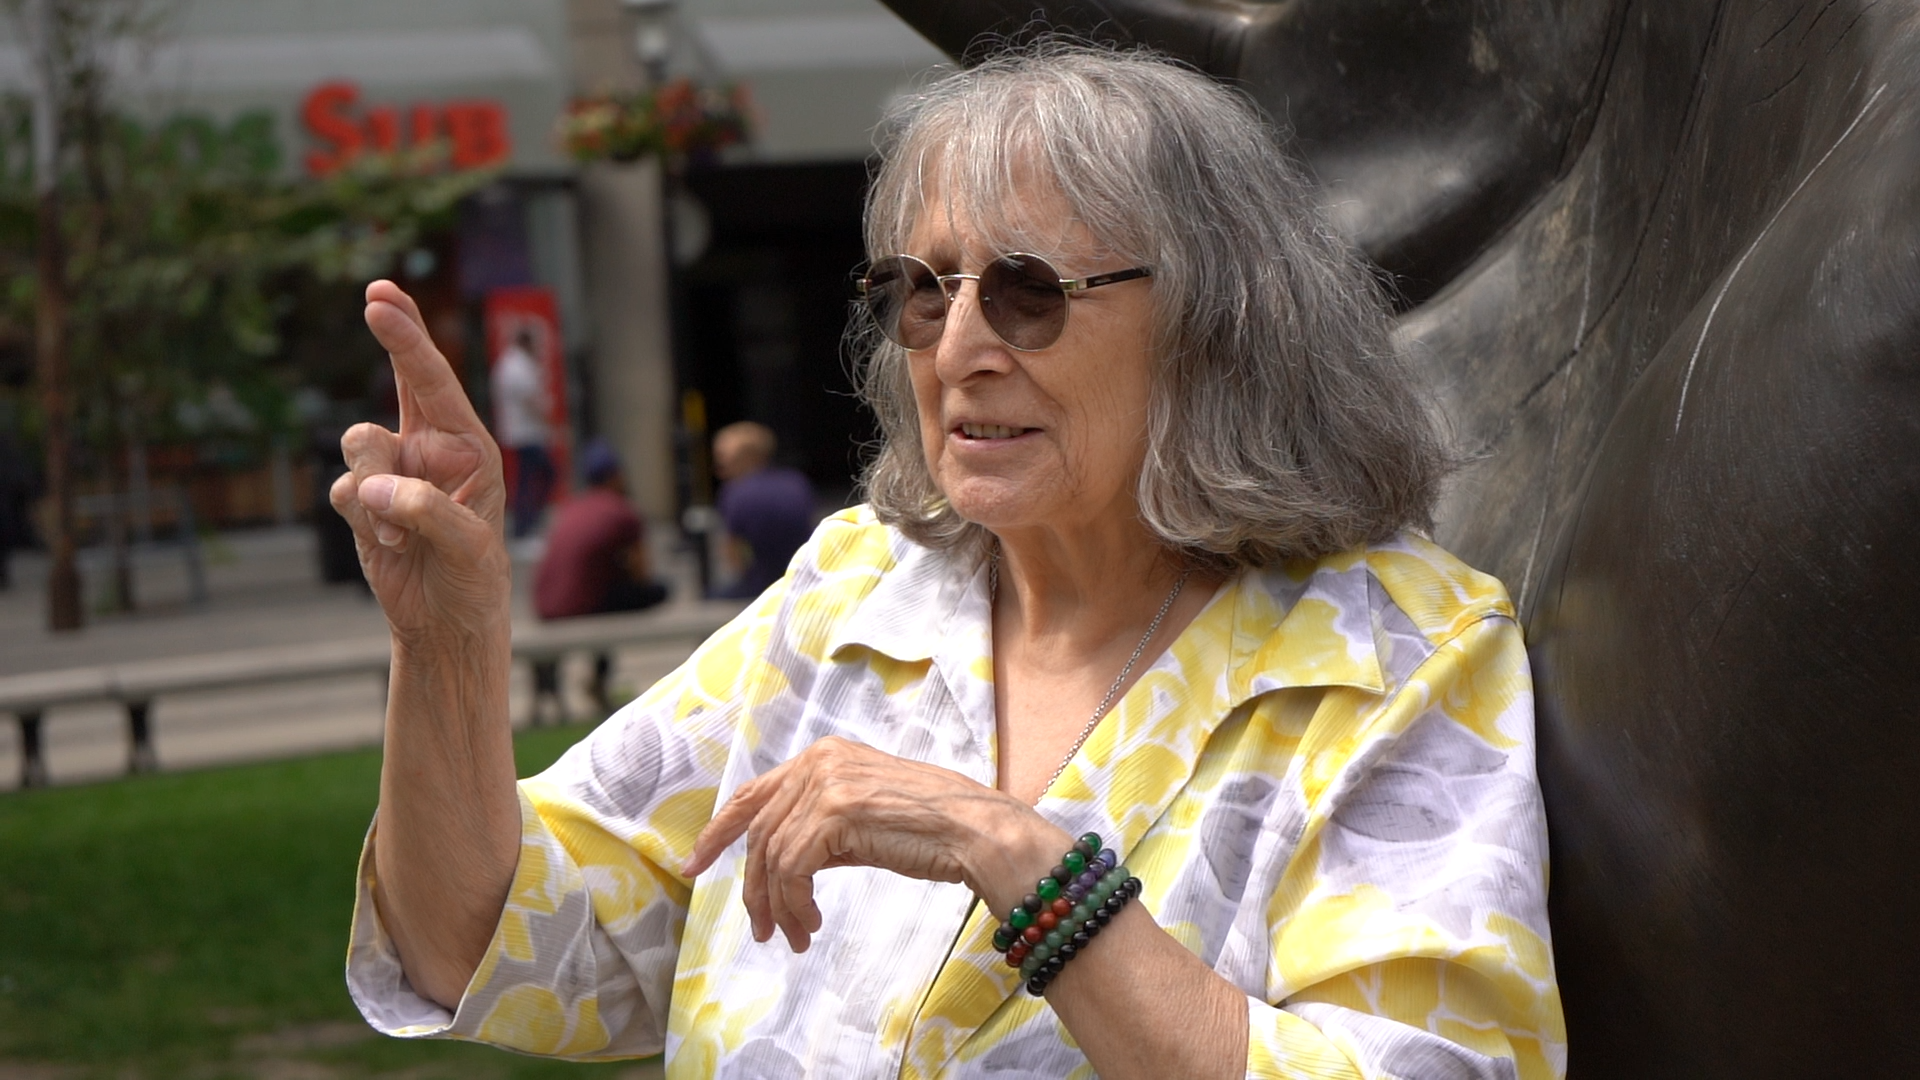 Shari, a white woman in her 70s wearing a yellow and grey blouse, dark glasses, and beaded bracelets. She stands in a park, signing, A statue of a hand is behind her.